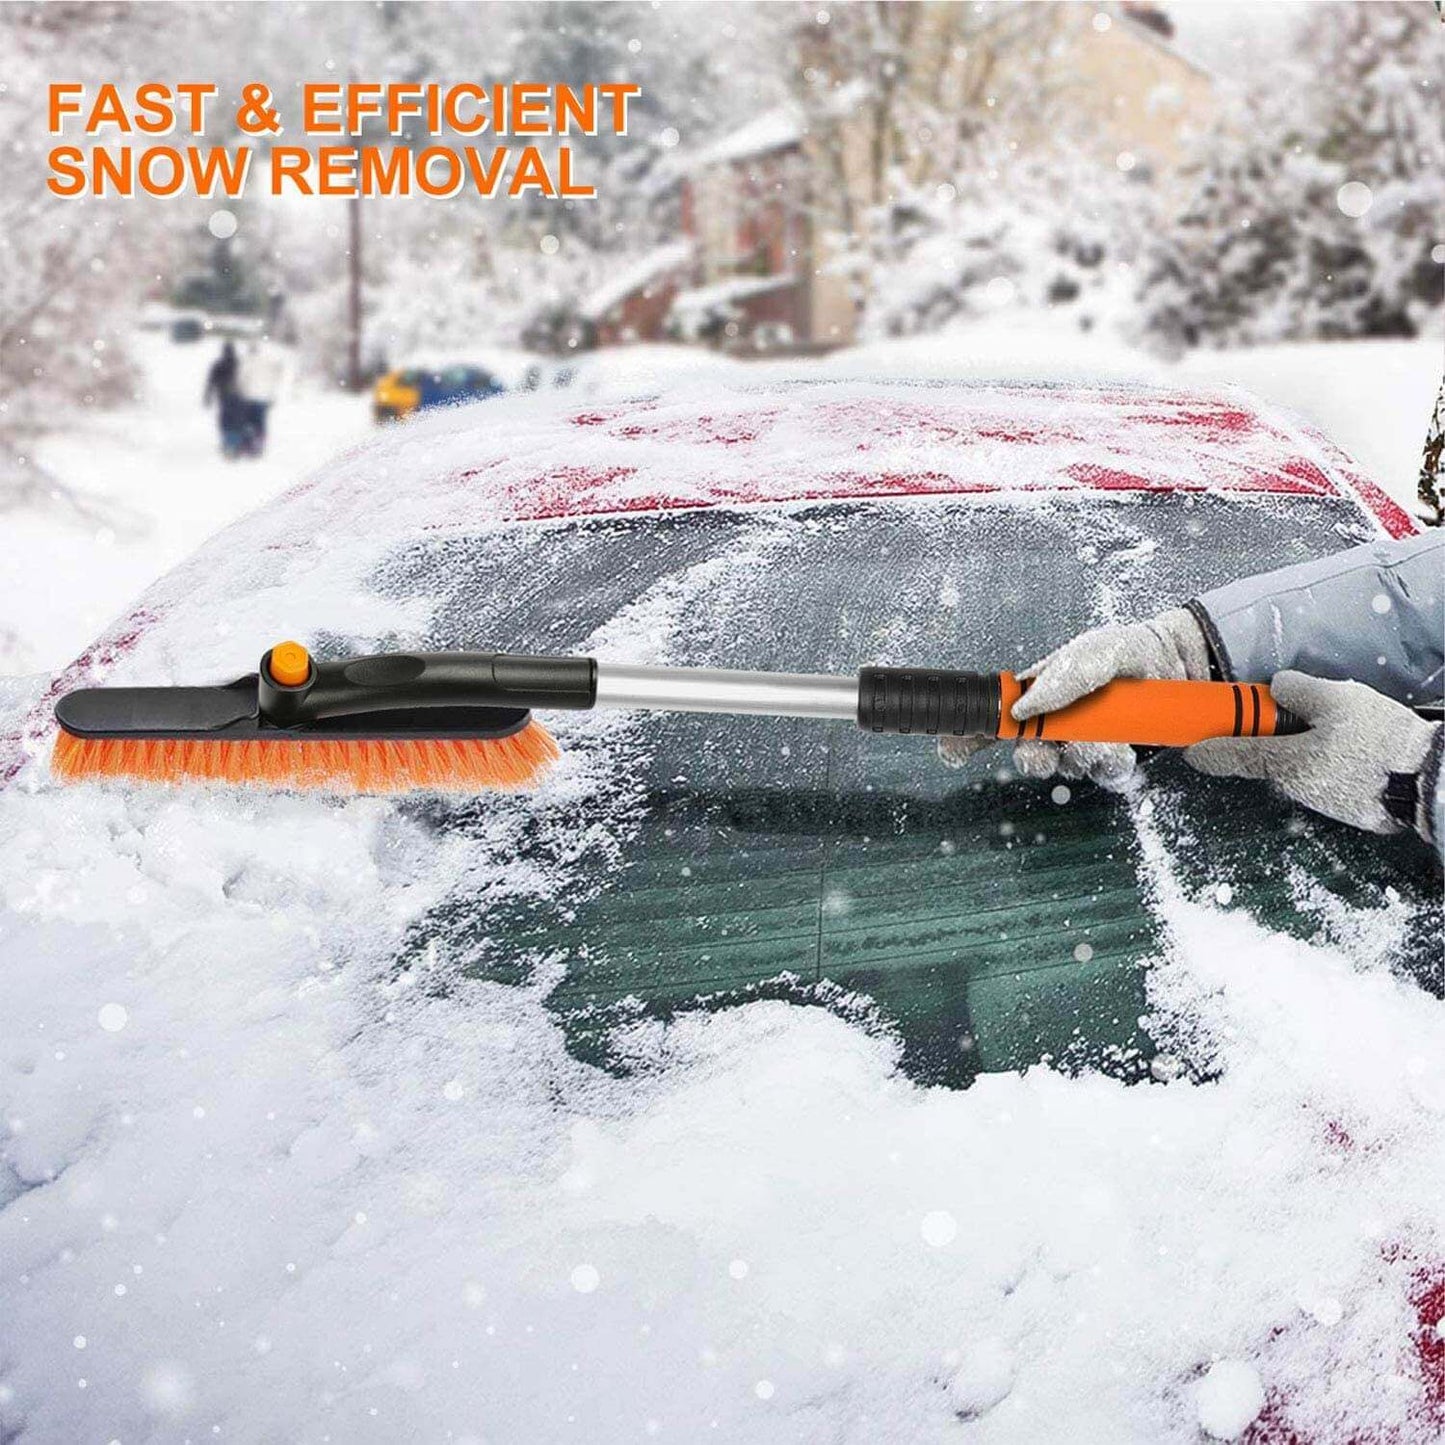 Snow Removal Brush - Extendable Ice Scraper for Car, SUV & Truck Windshield Ice Windows